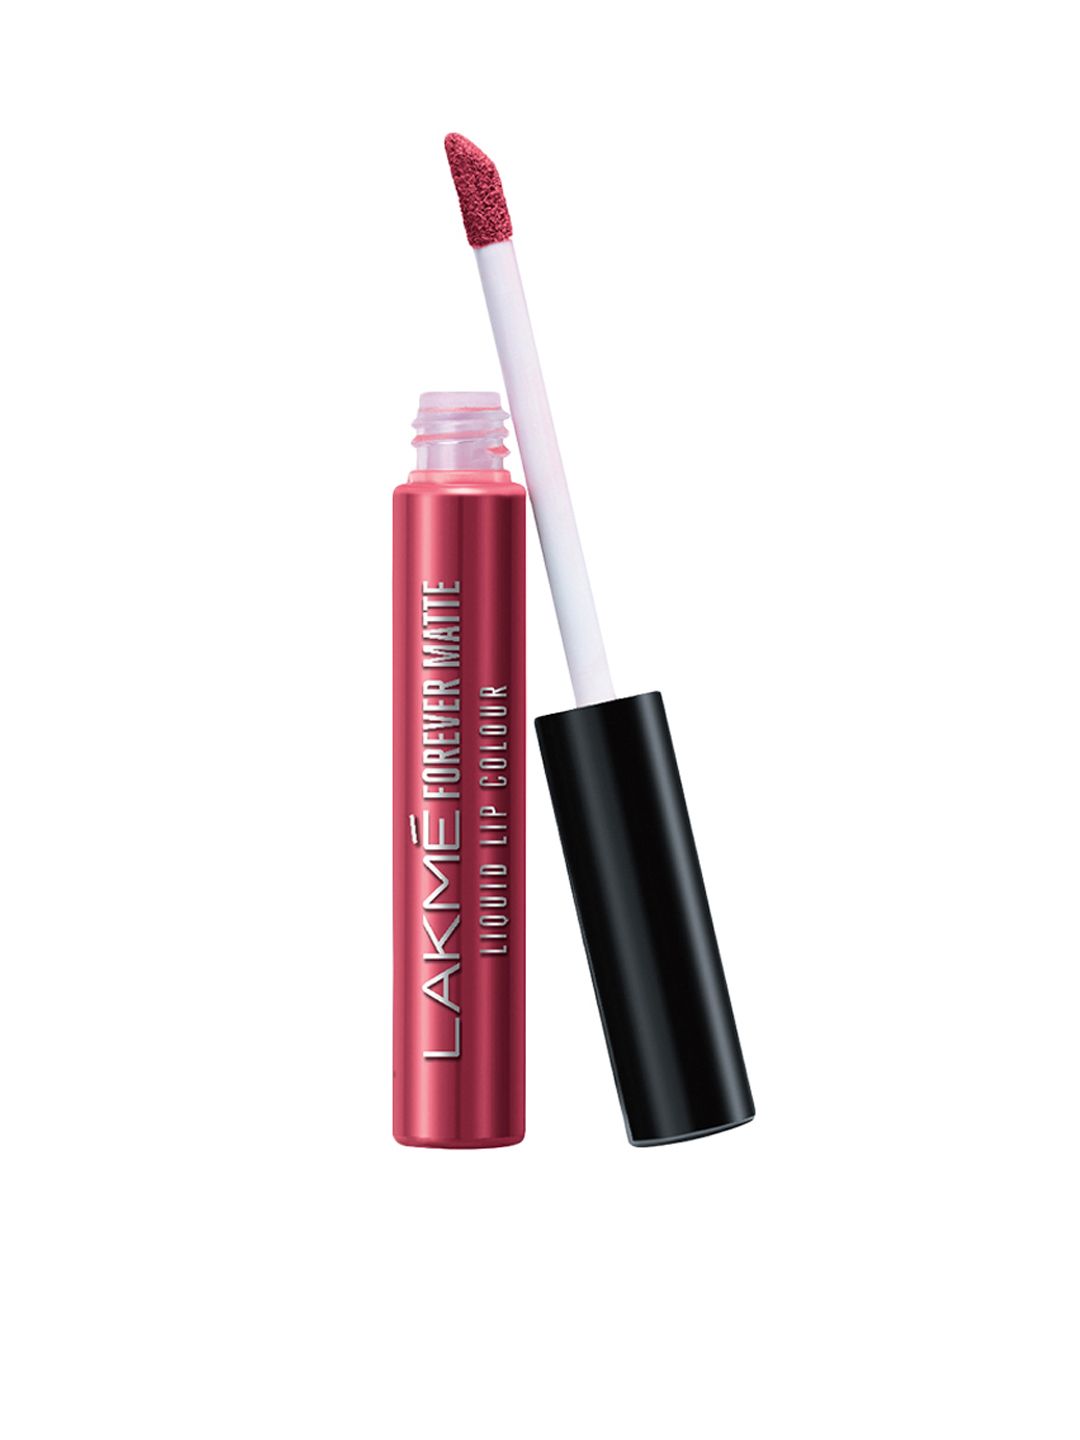 Lakme Forever Matte Liquid Lip Color - Pink Glam 5.6 ml Price in India